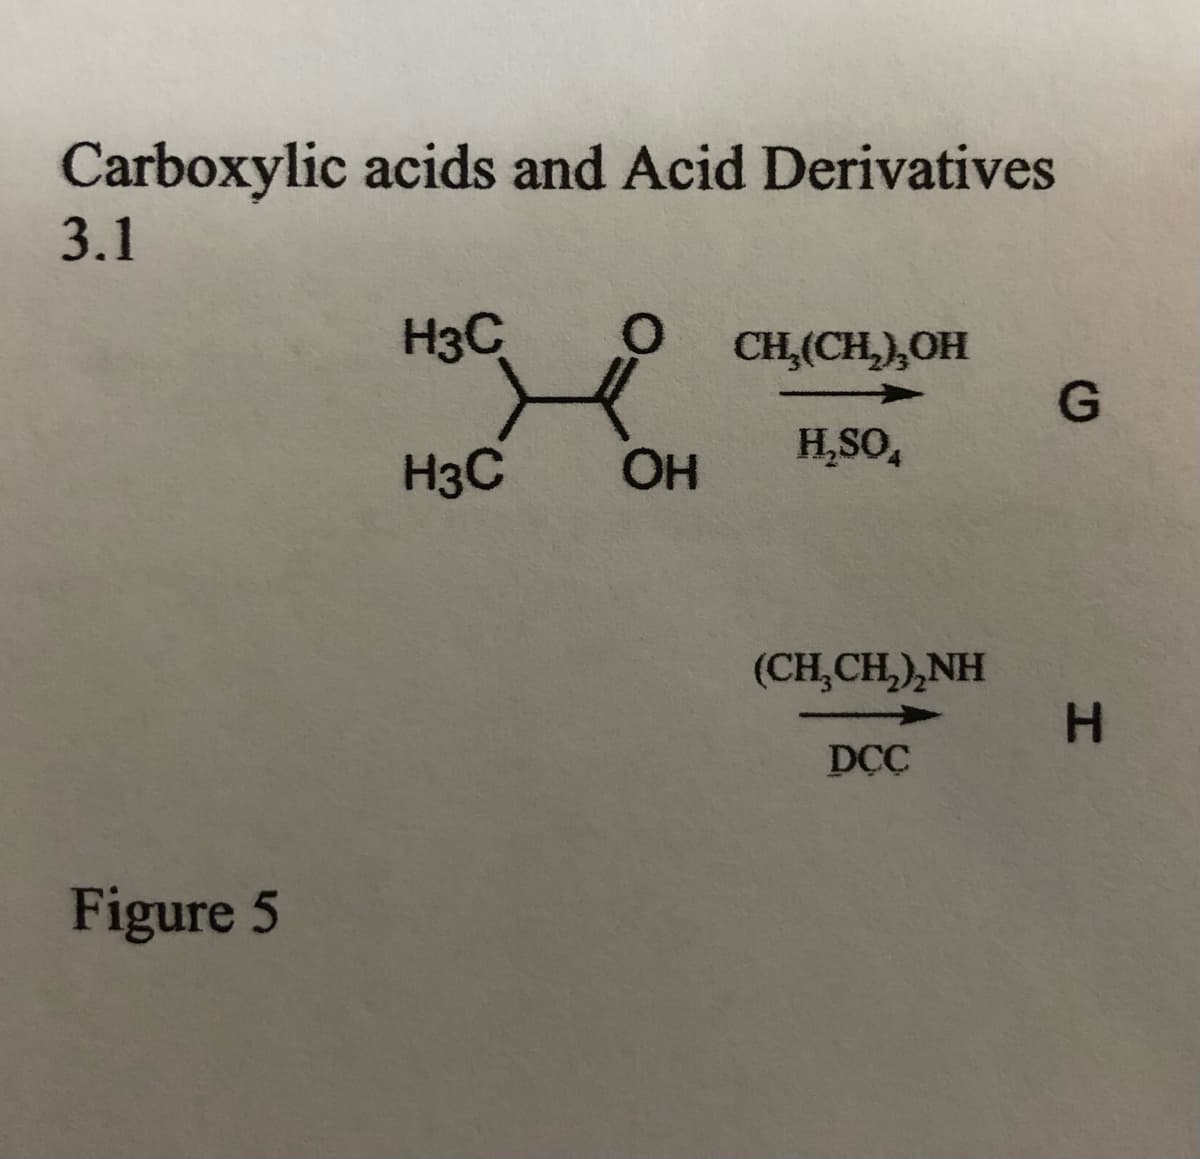 Carboxylic acids and Acid Derivatives
3.1
H3C
CH,(CH,),OH
H,SO,
H3C
(CH,CH,),NH
H.
DCC
Figure 5
